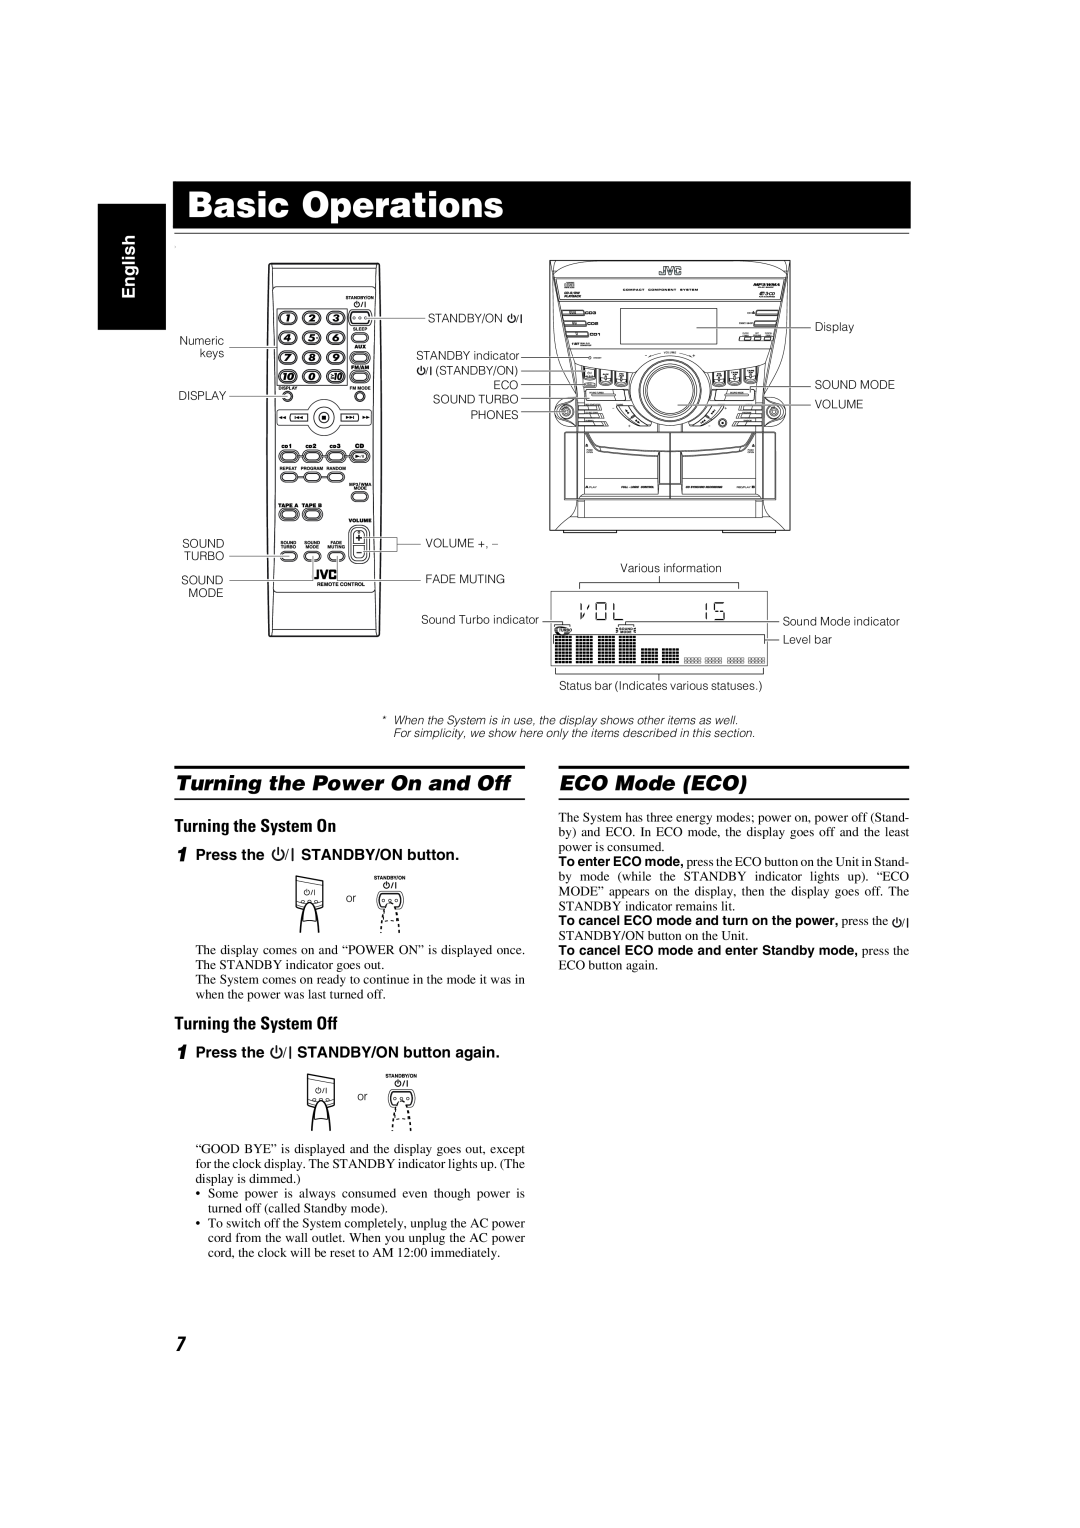 JVC MX-KC45 manual Basic Operations, Turning the Power On and Off, ECO Mode ECO, English, Turning the System On 